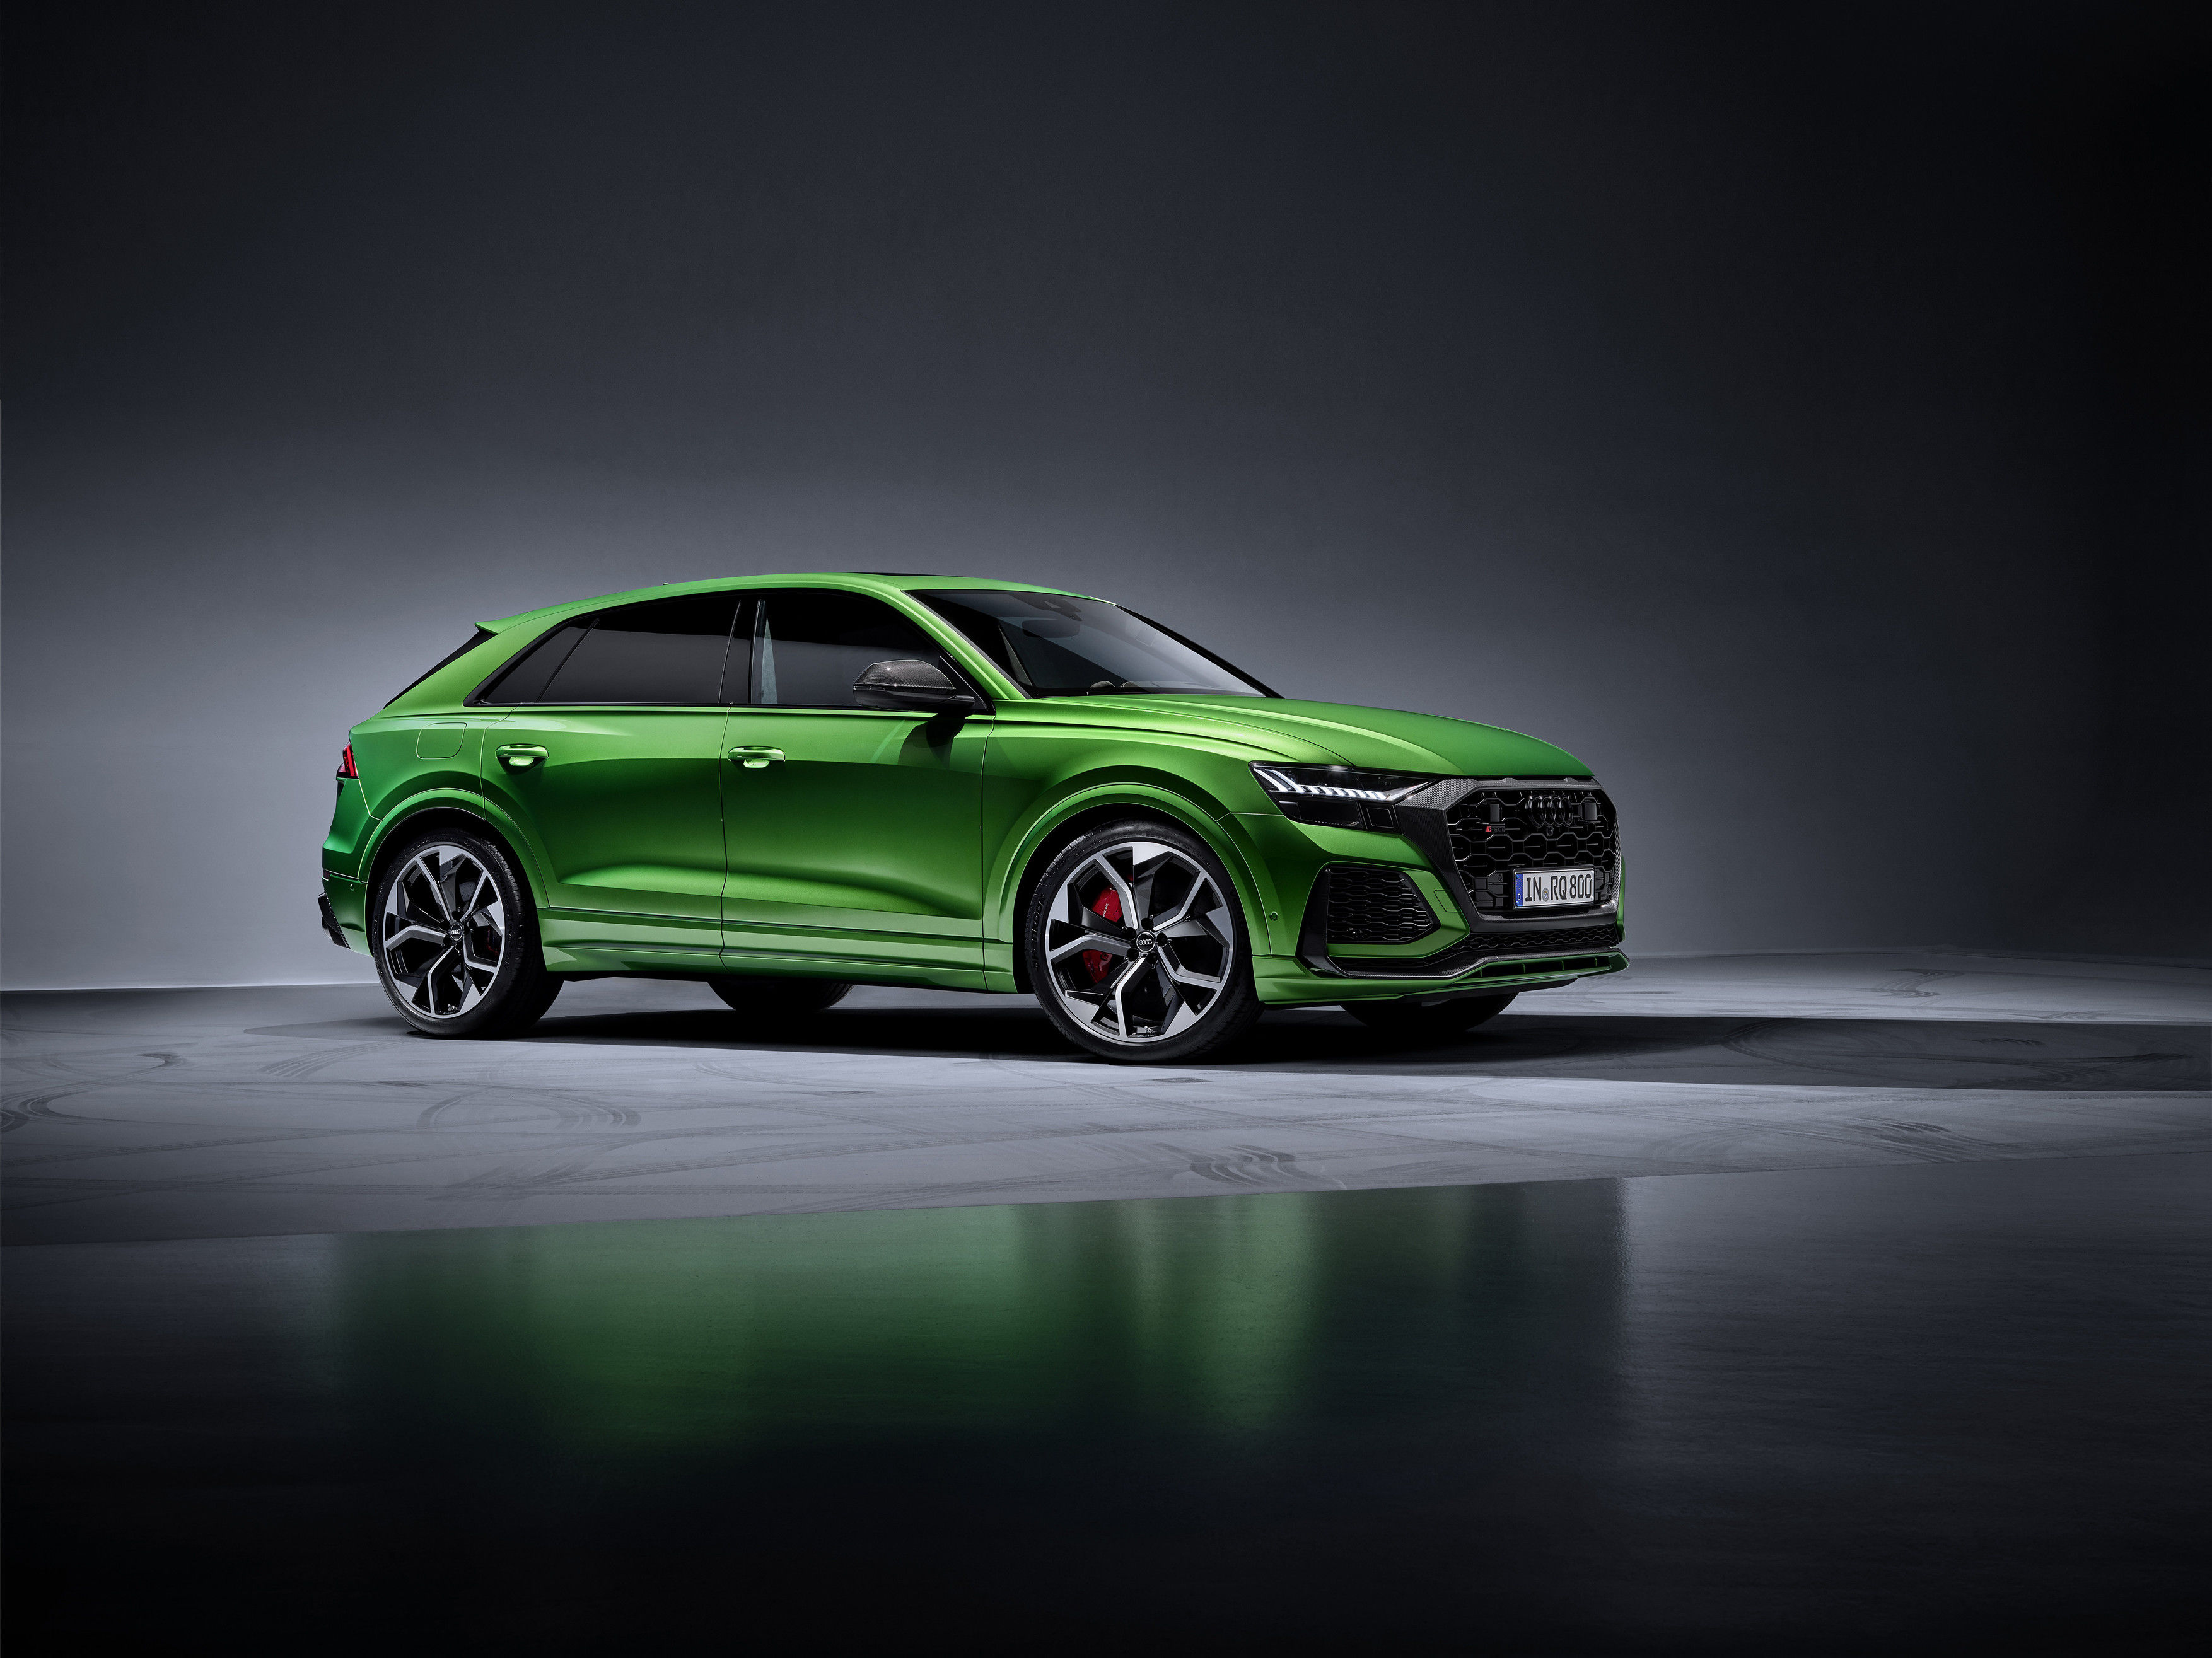 Audi RS Q8 is targeted towards luxury sports car fans.